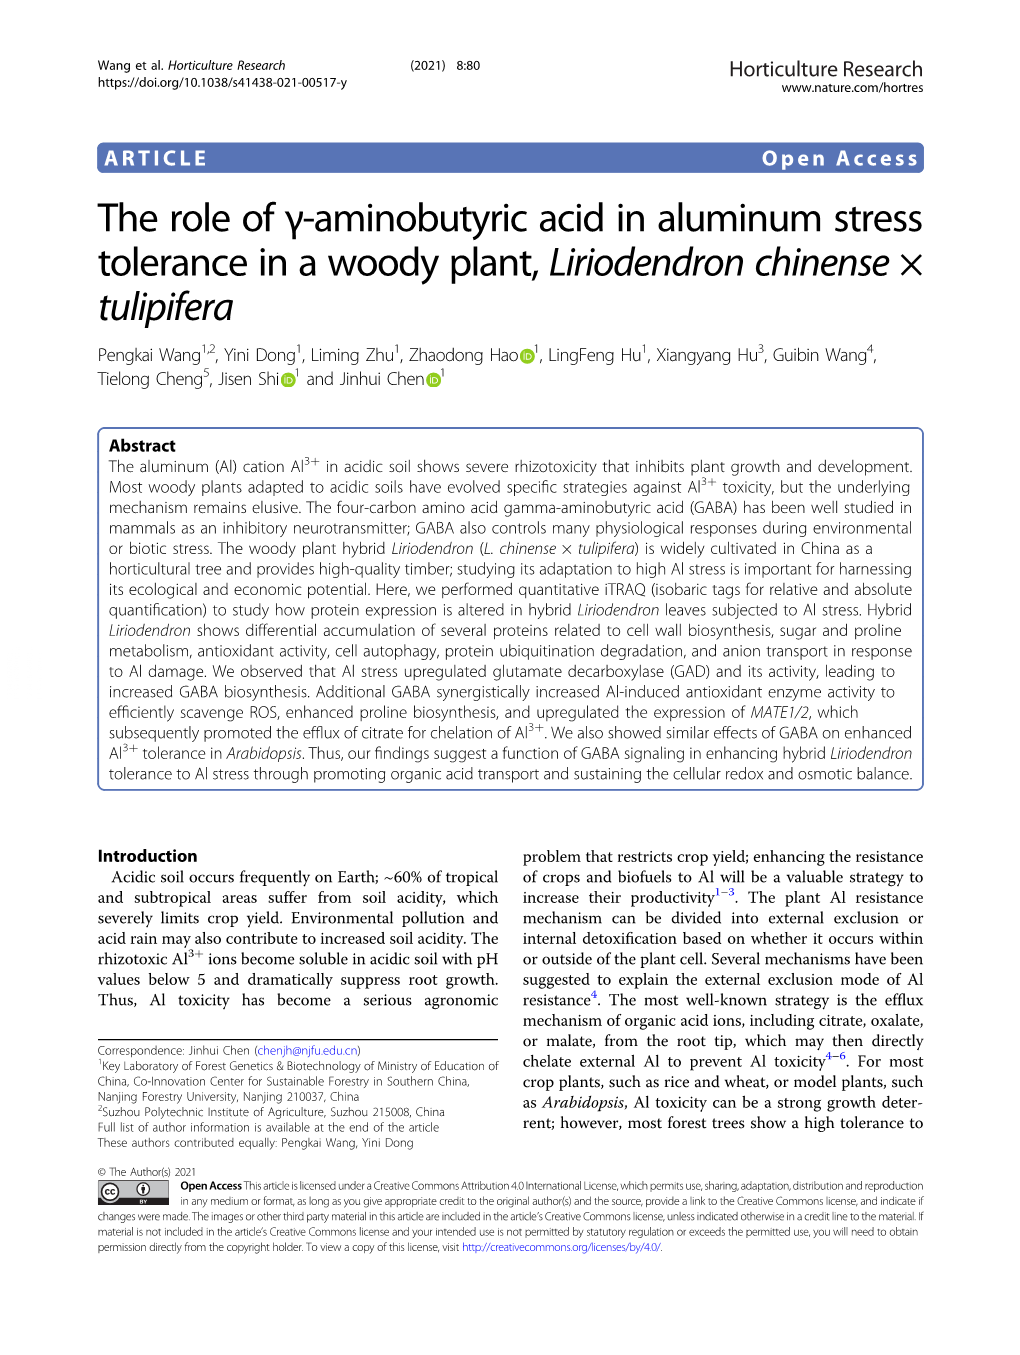 The Role of Γ-Aminobutyric Acid in Aluminum Stress Tolerance in A